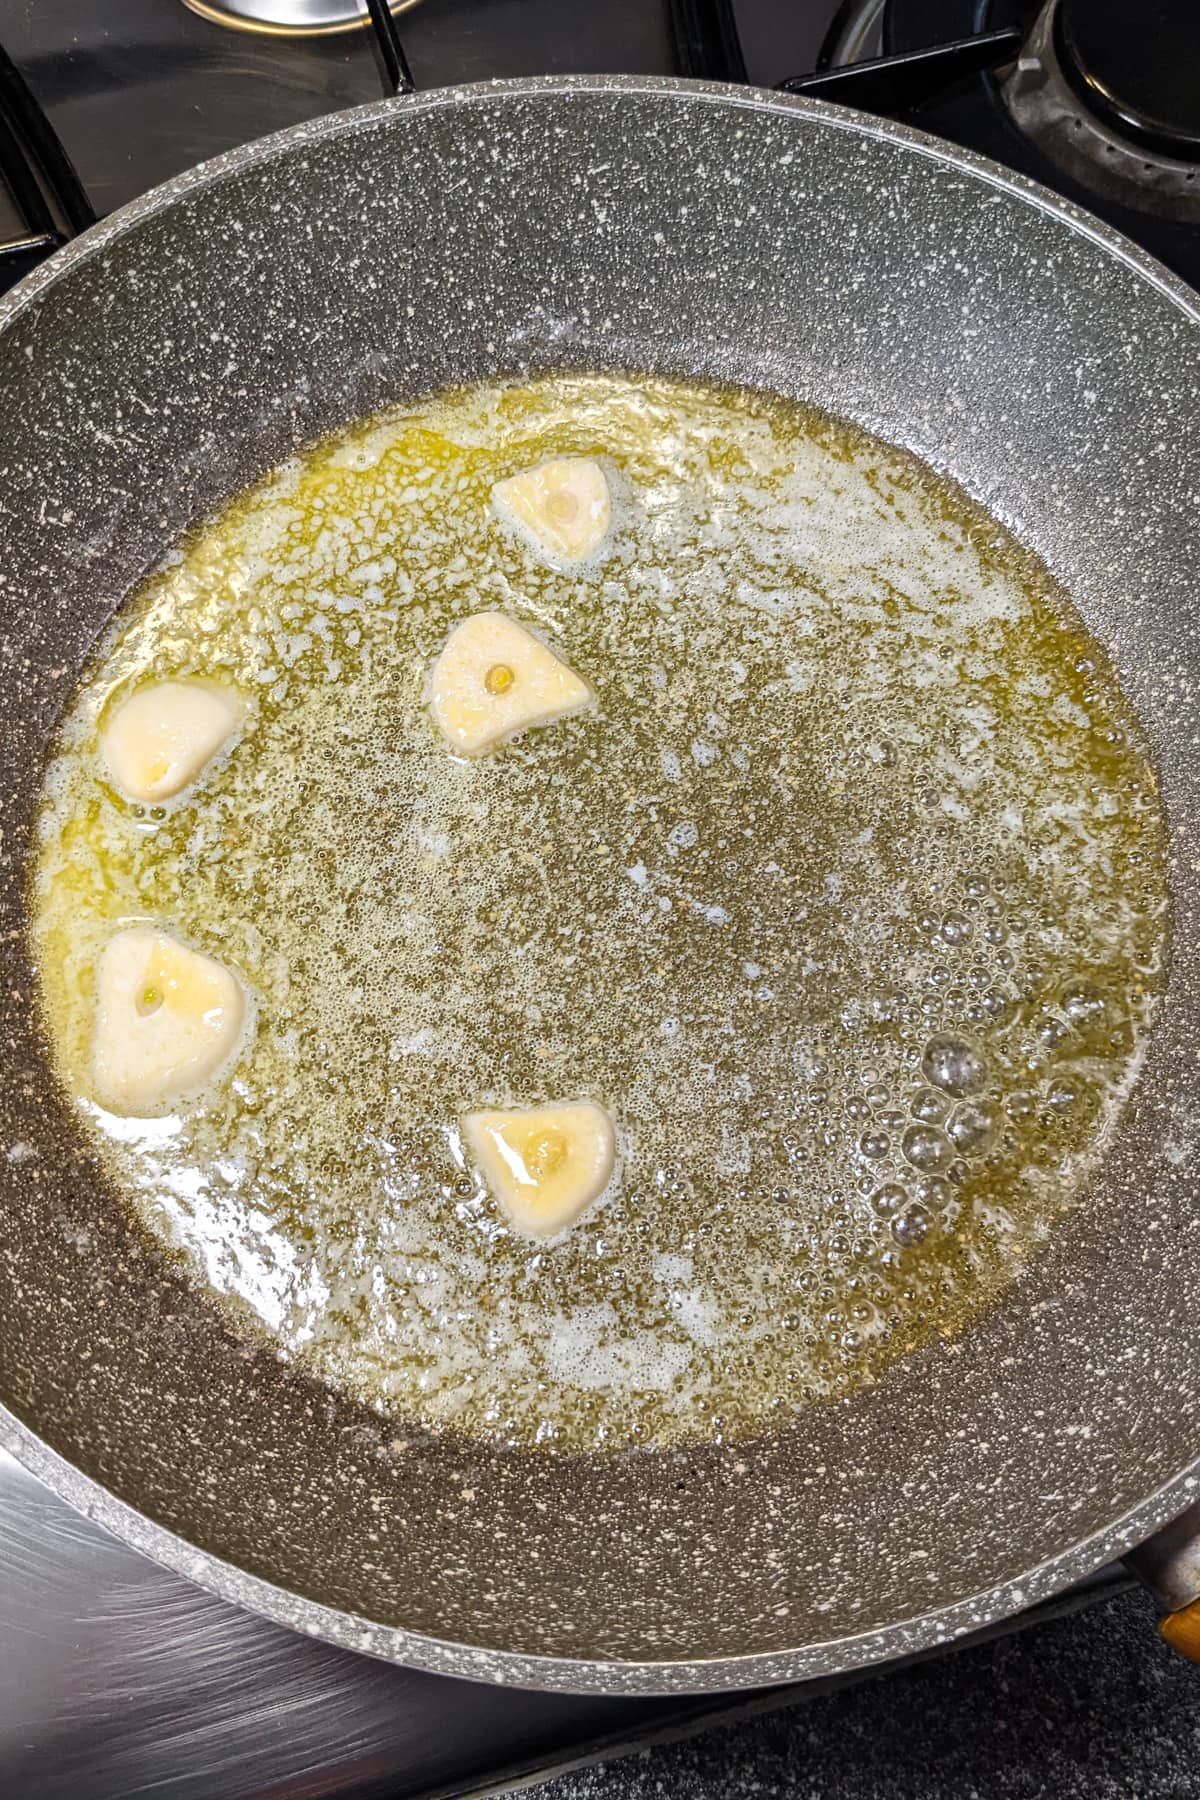 Frying garlic clove slices in melted butter on the stove.